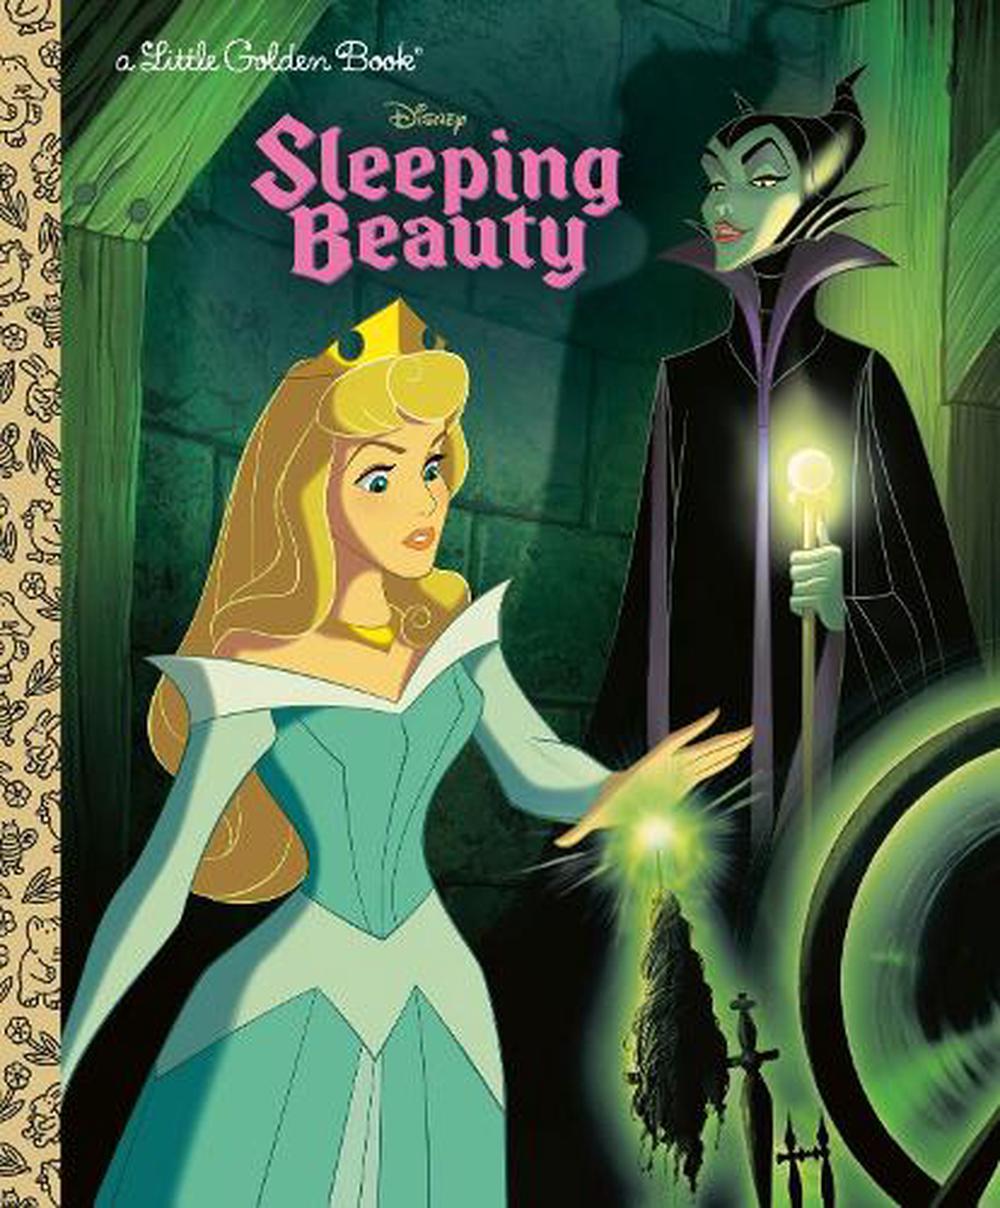 (Disney　Buy　Sleeping　online　9780736421980　at　Teitelbaum,　by　Beauty　Michael　Princess)　Hardcover,　The　Nile